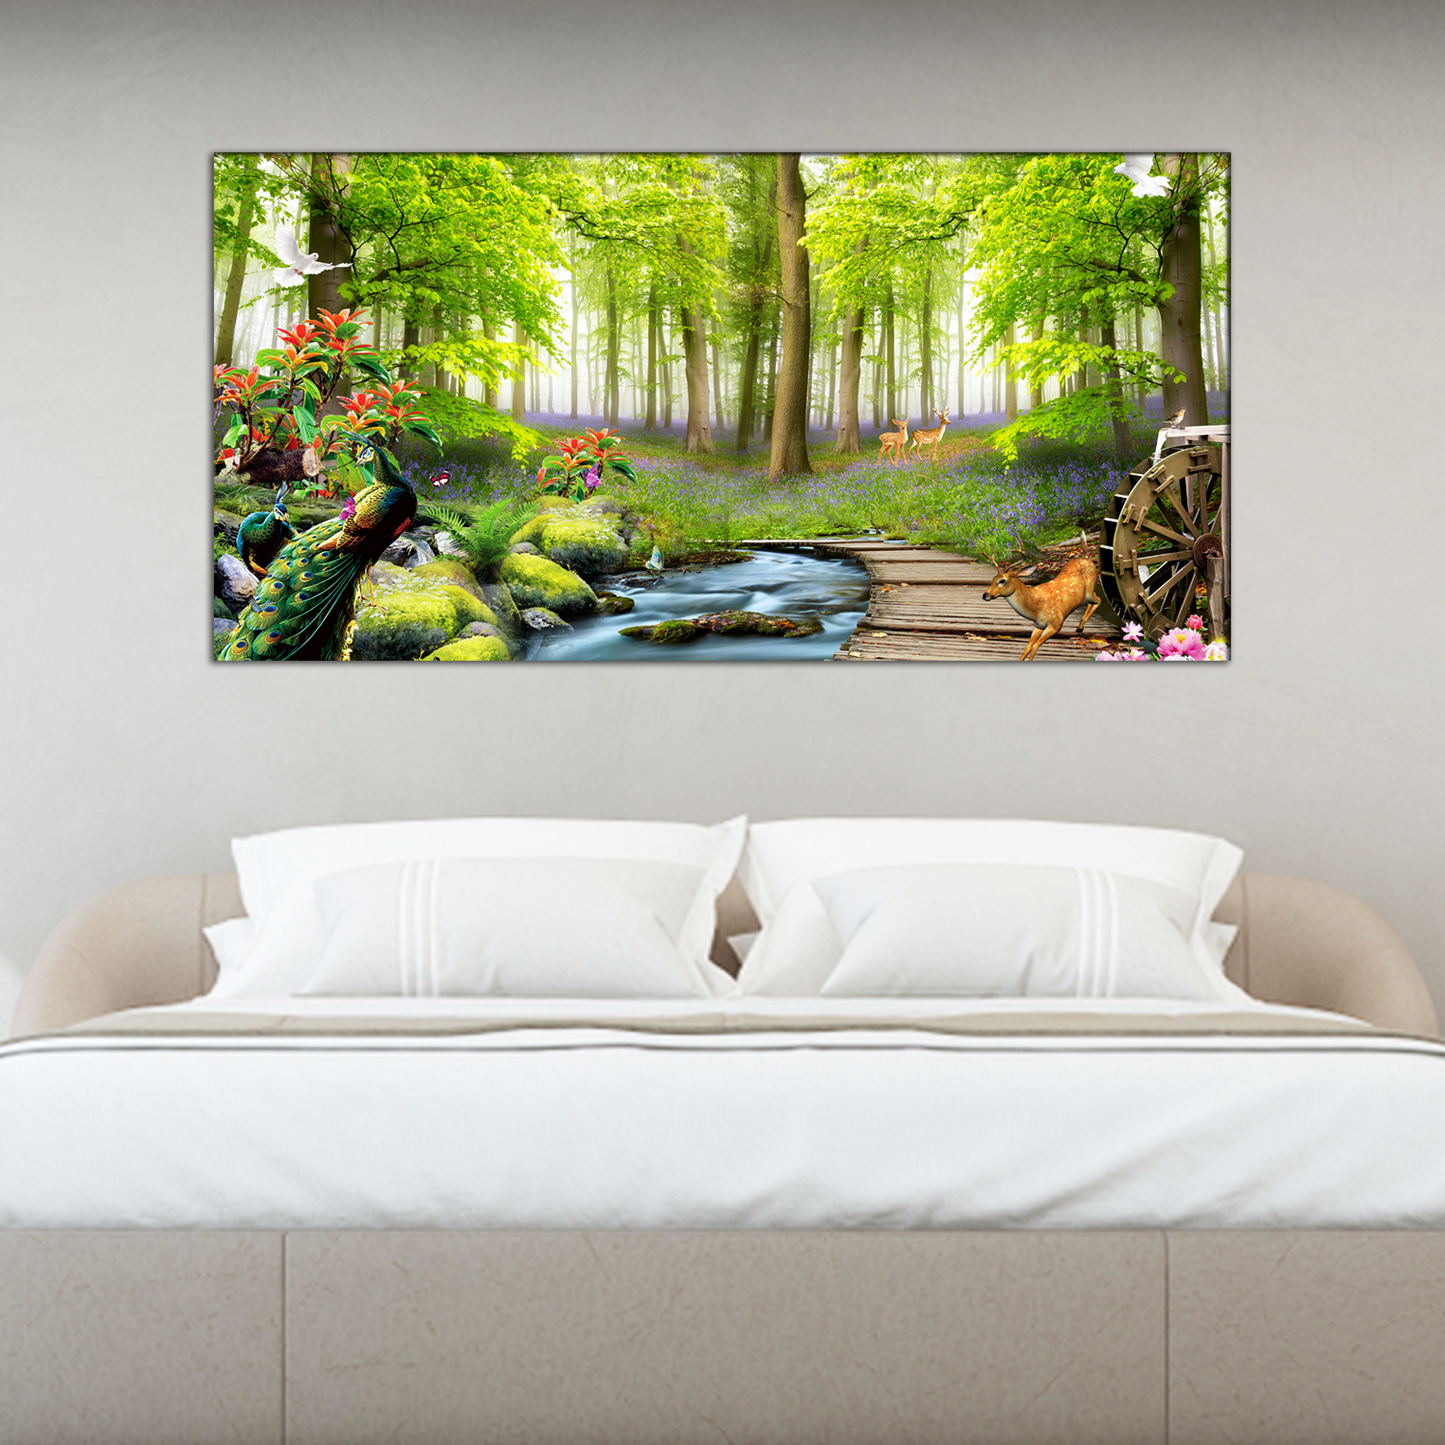 Nature Forest and Animals Canvas Print Wall Painting